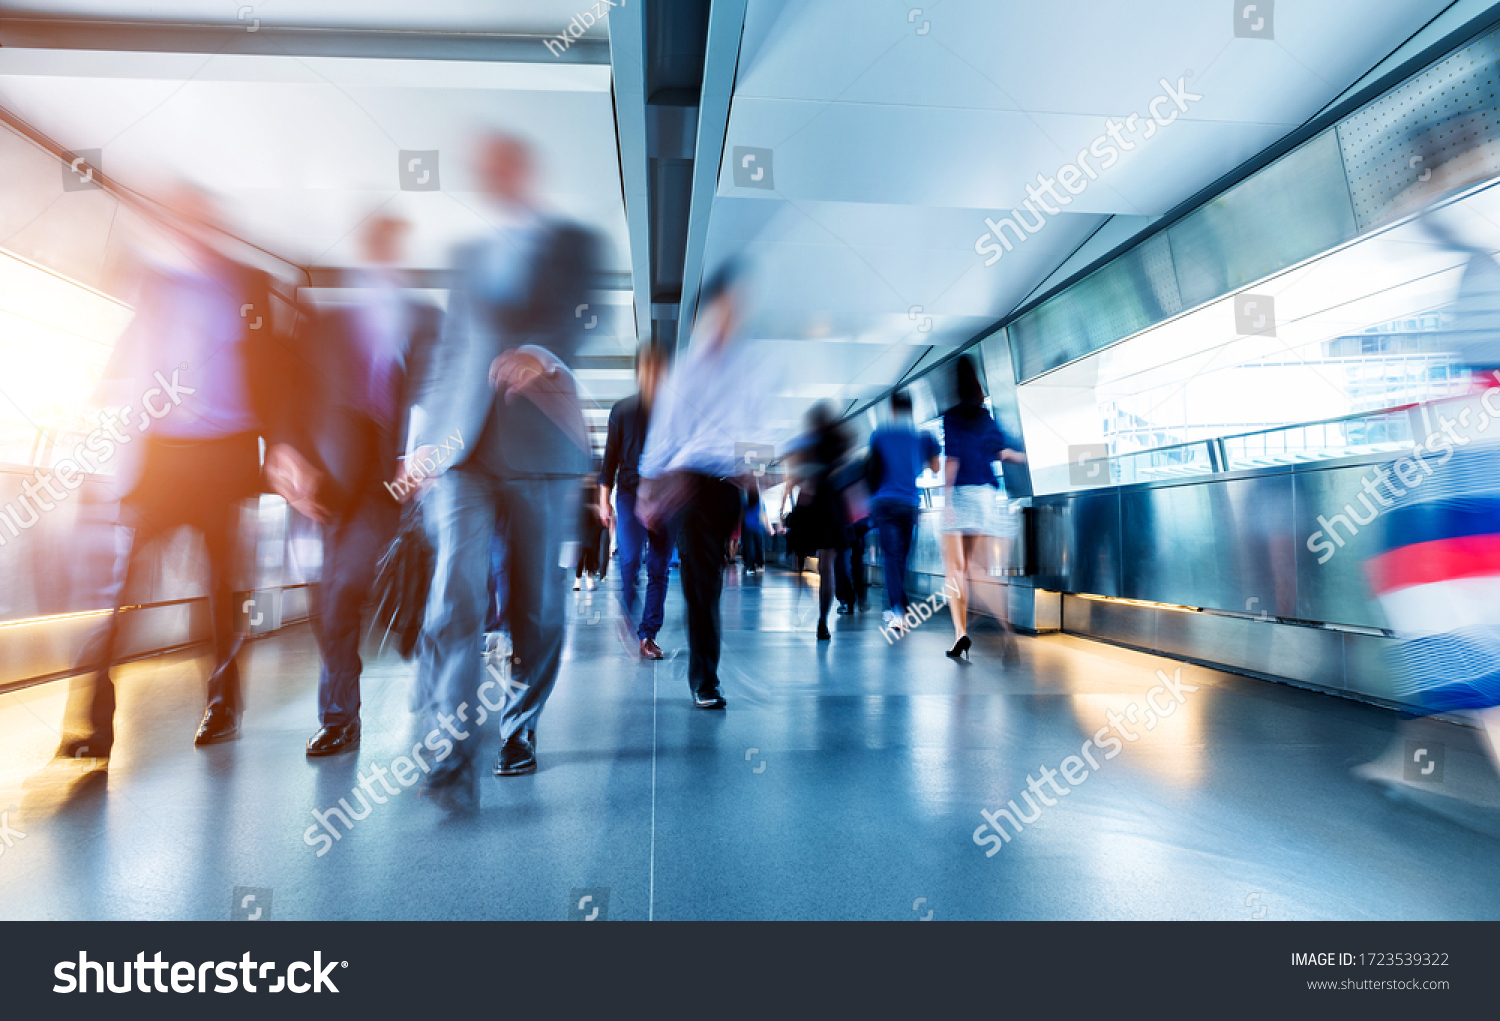 Business people rushing in the lobby. #1723539322